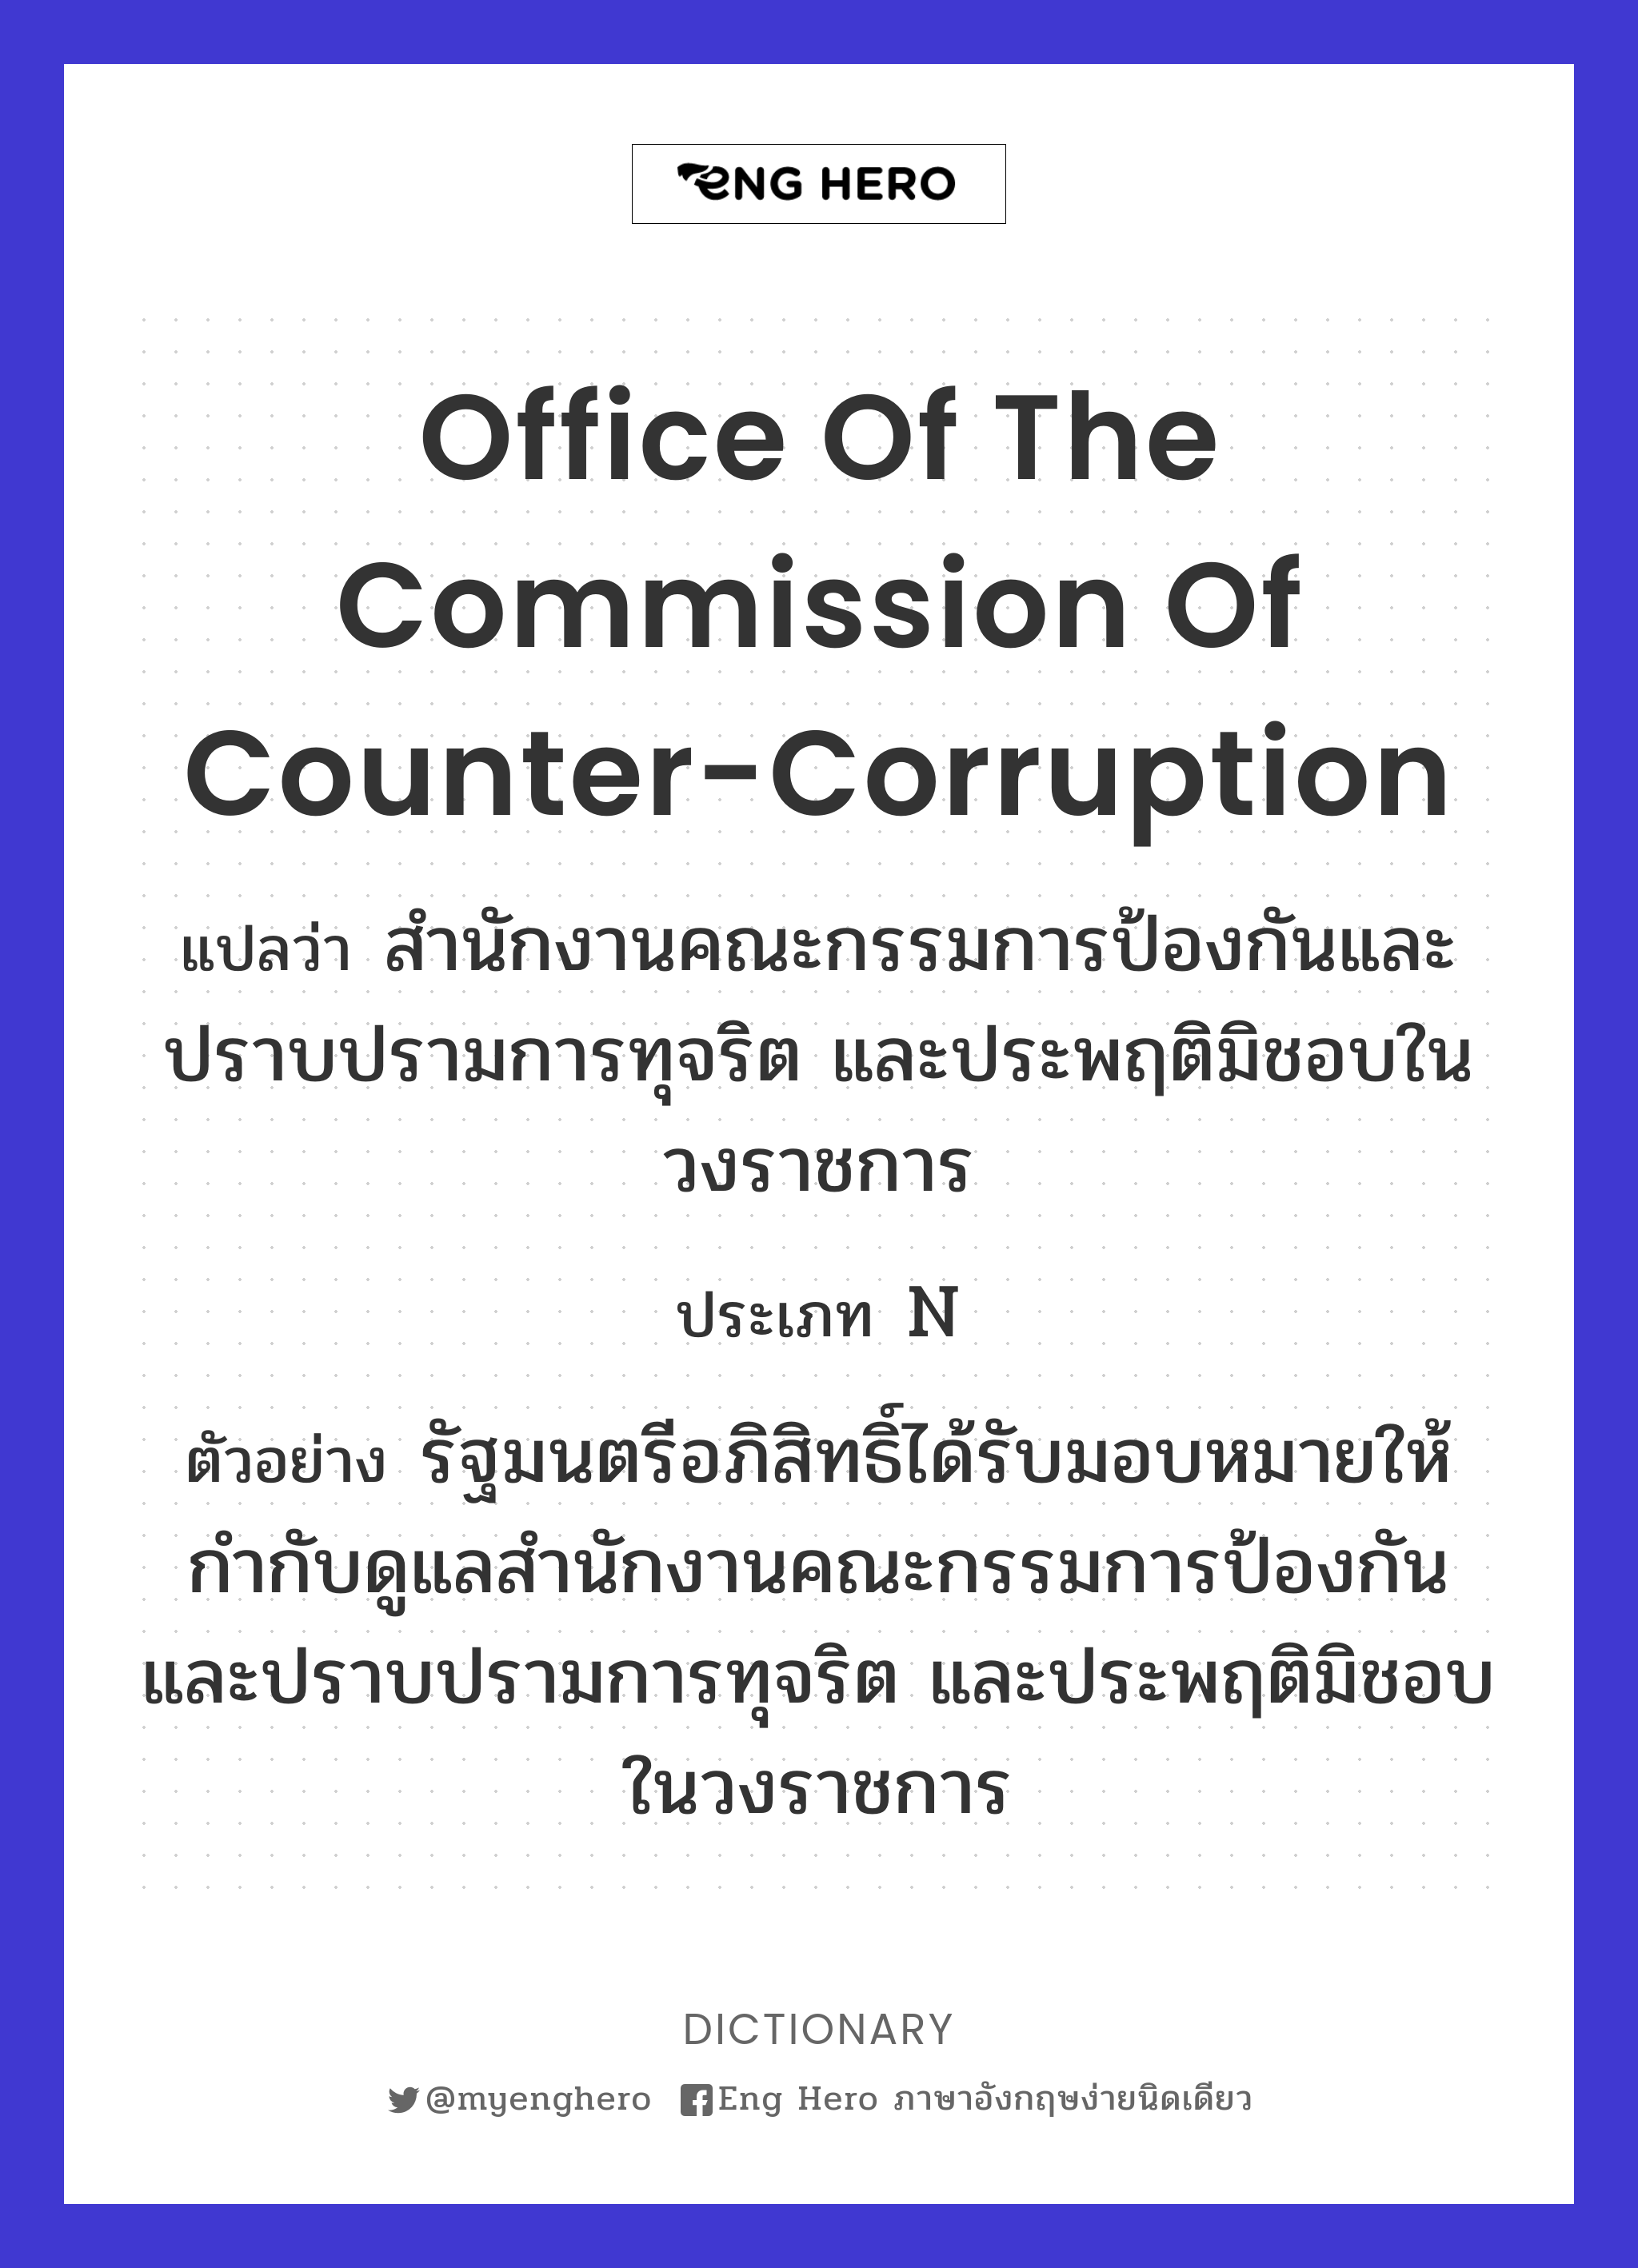 Office of the Commission of Counter-Corruption